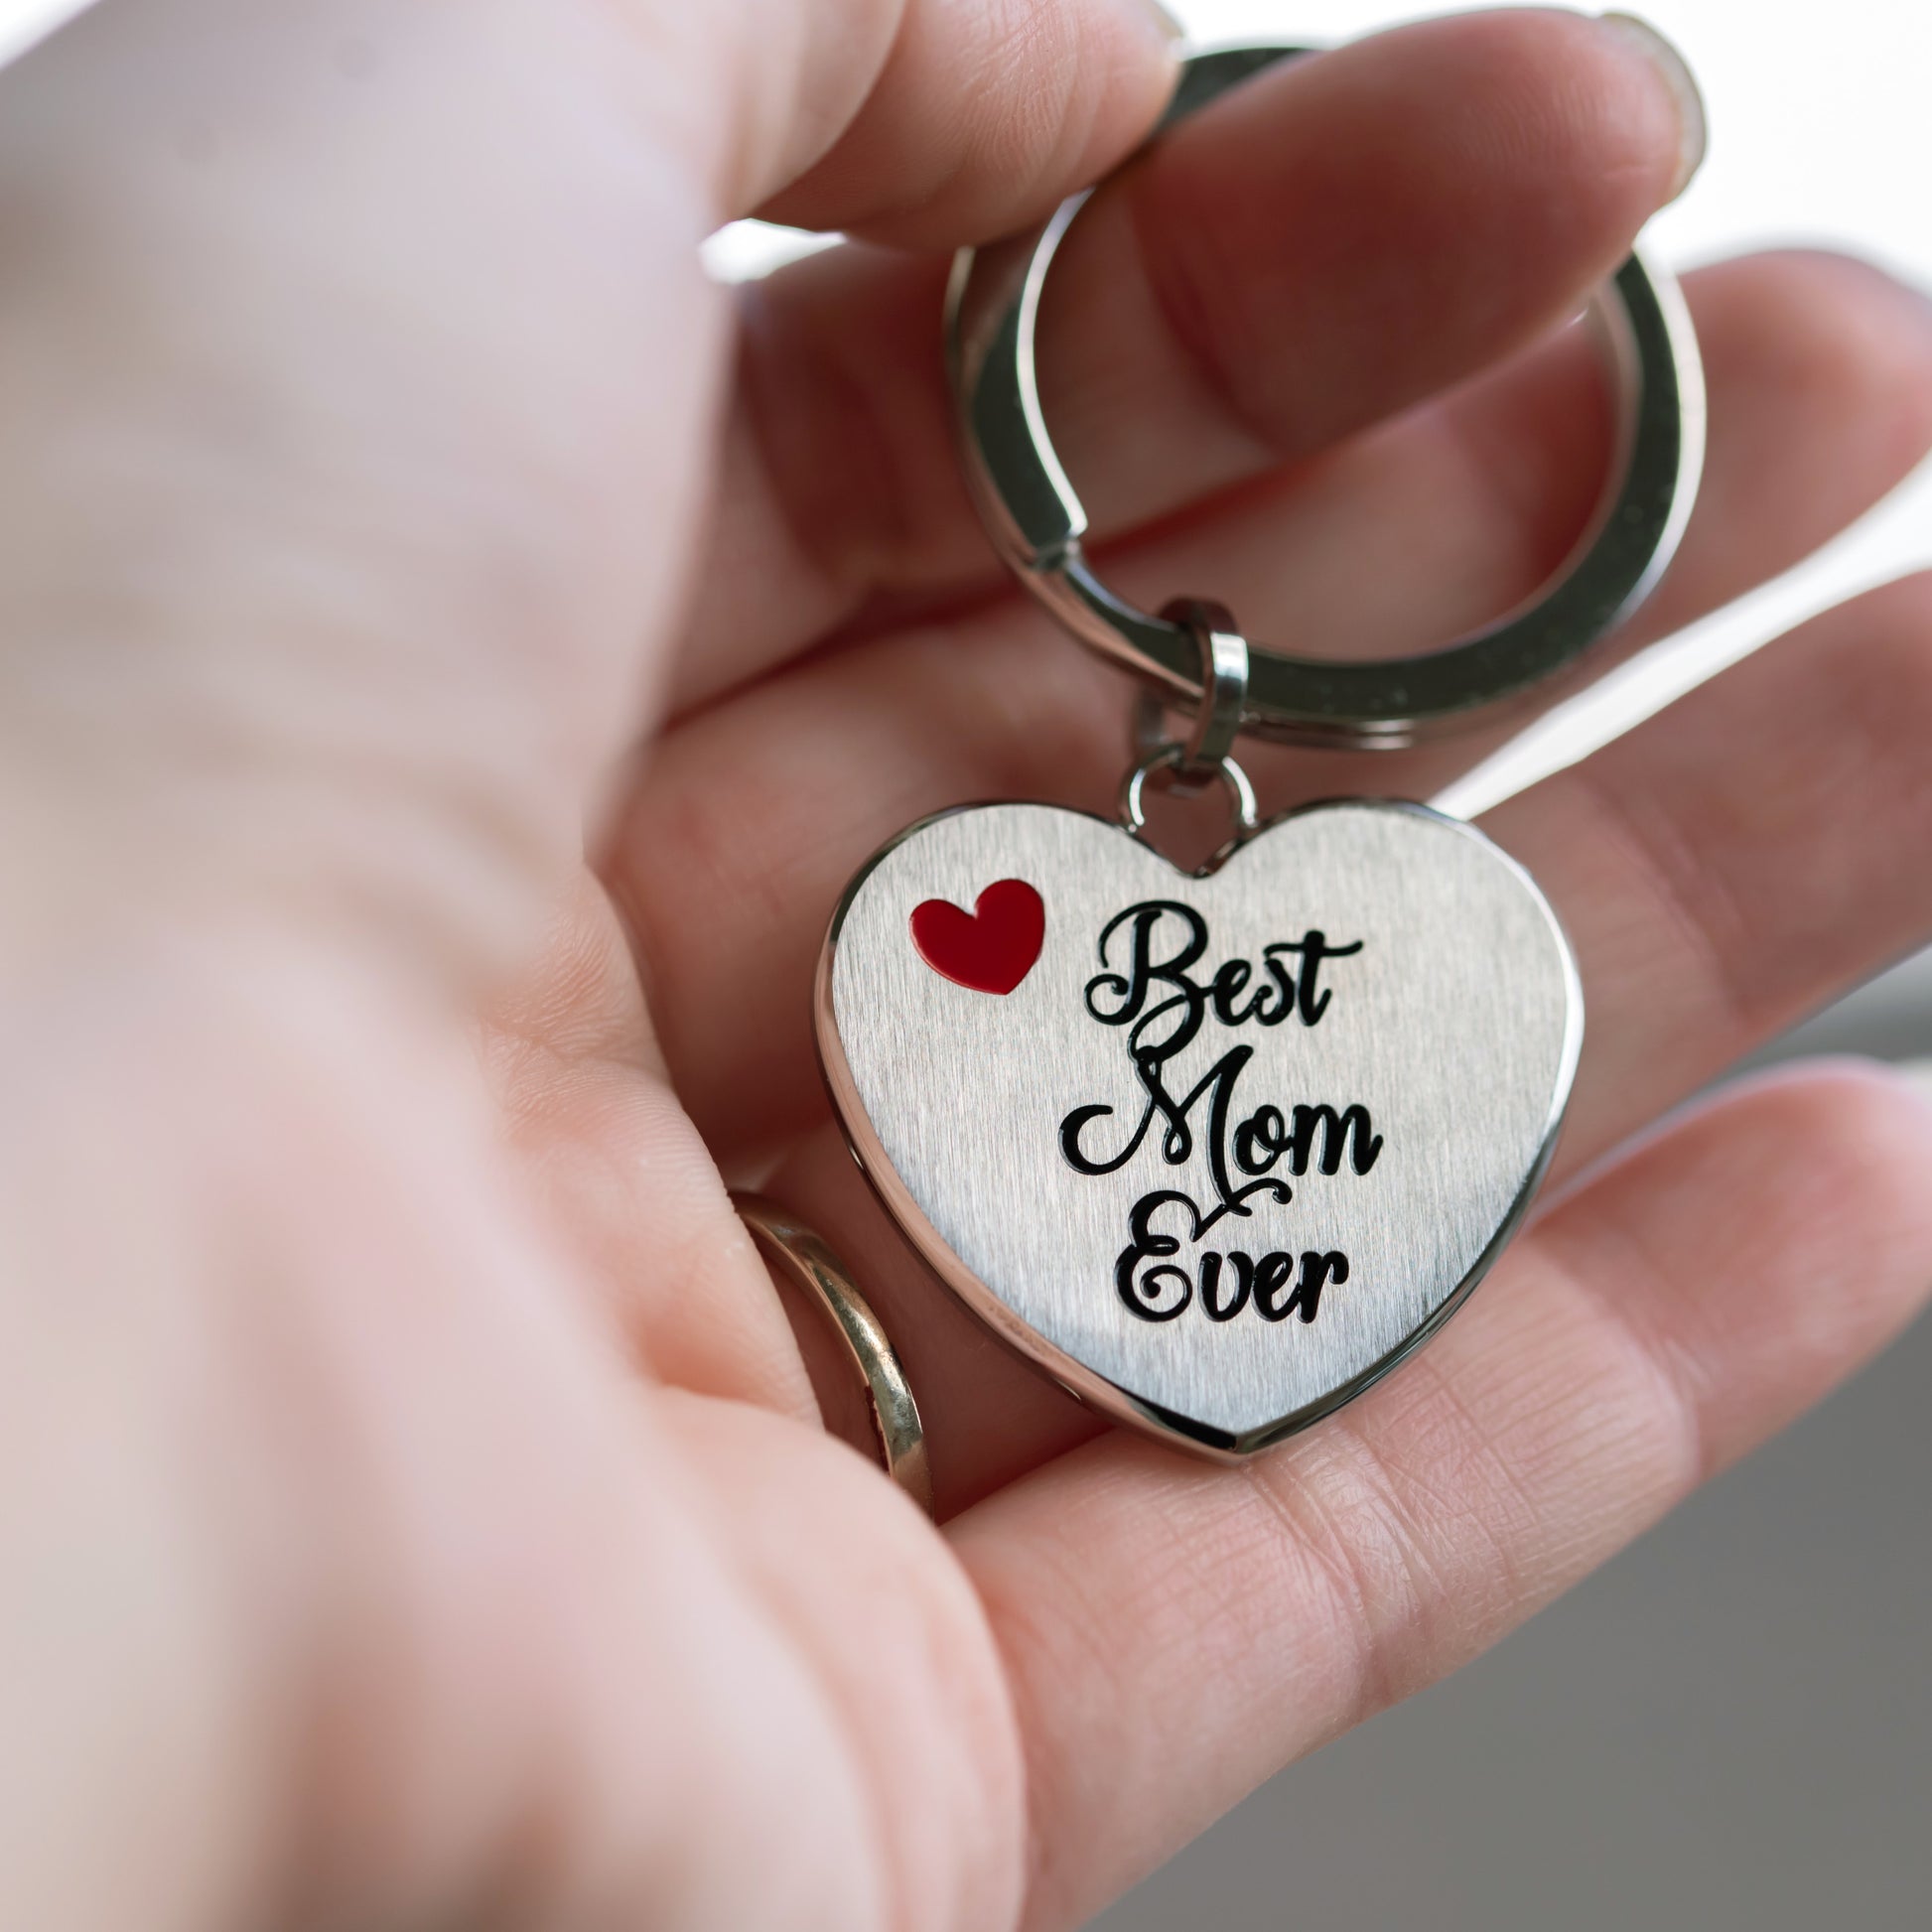 Best Mom Ever Heart Shaped Stainless Steel Keyring - Sentimental Mother's Day or Birthday Gift